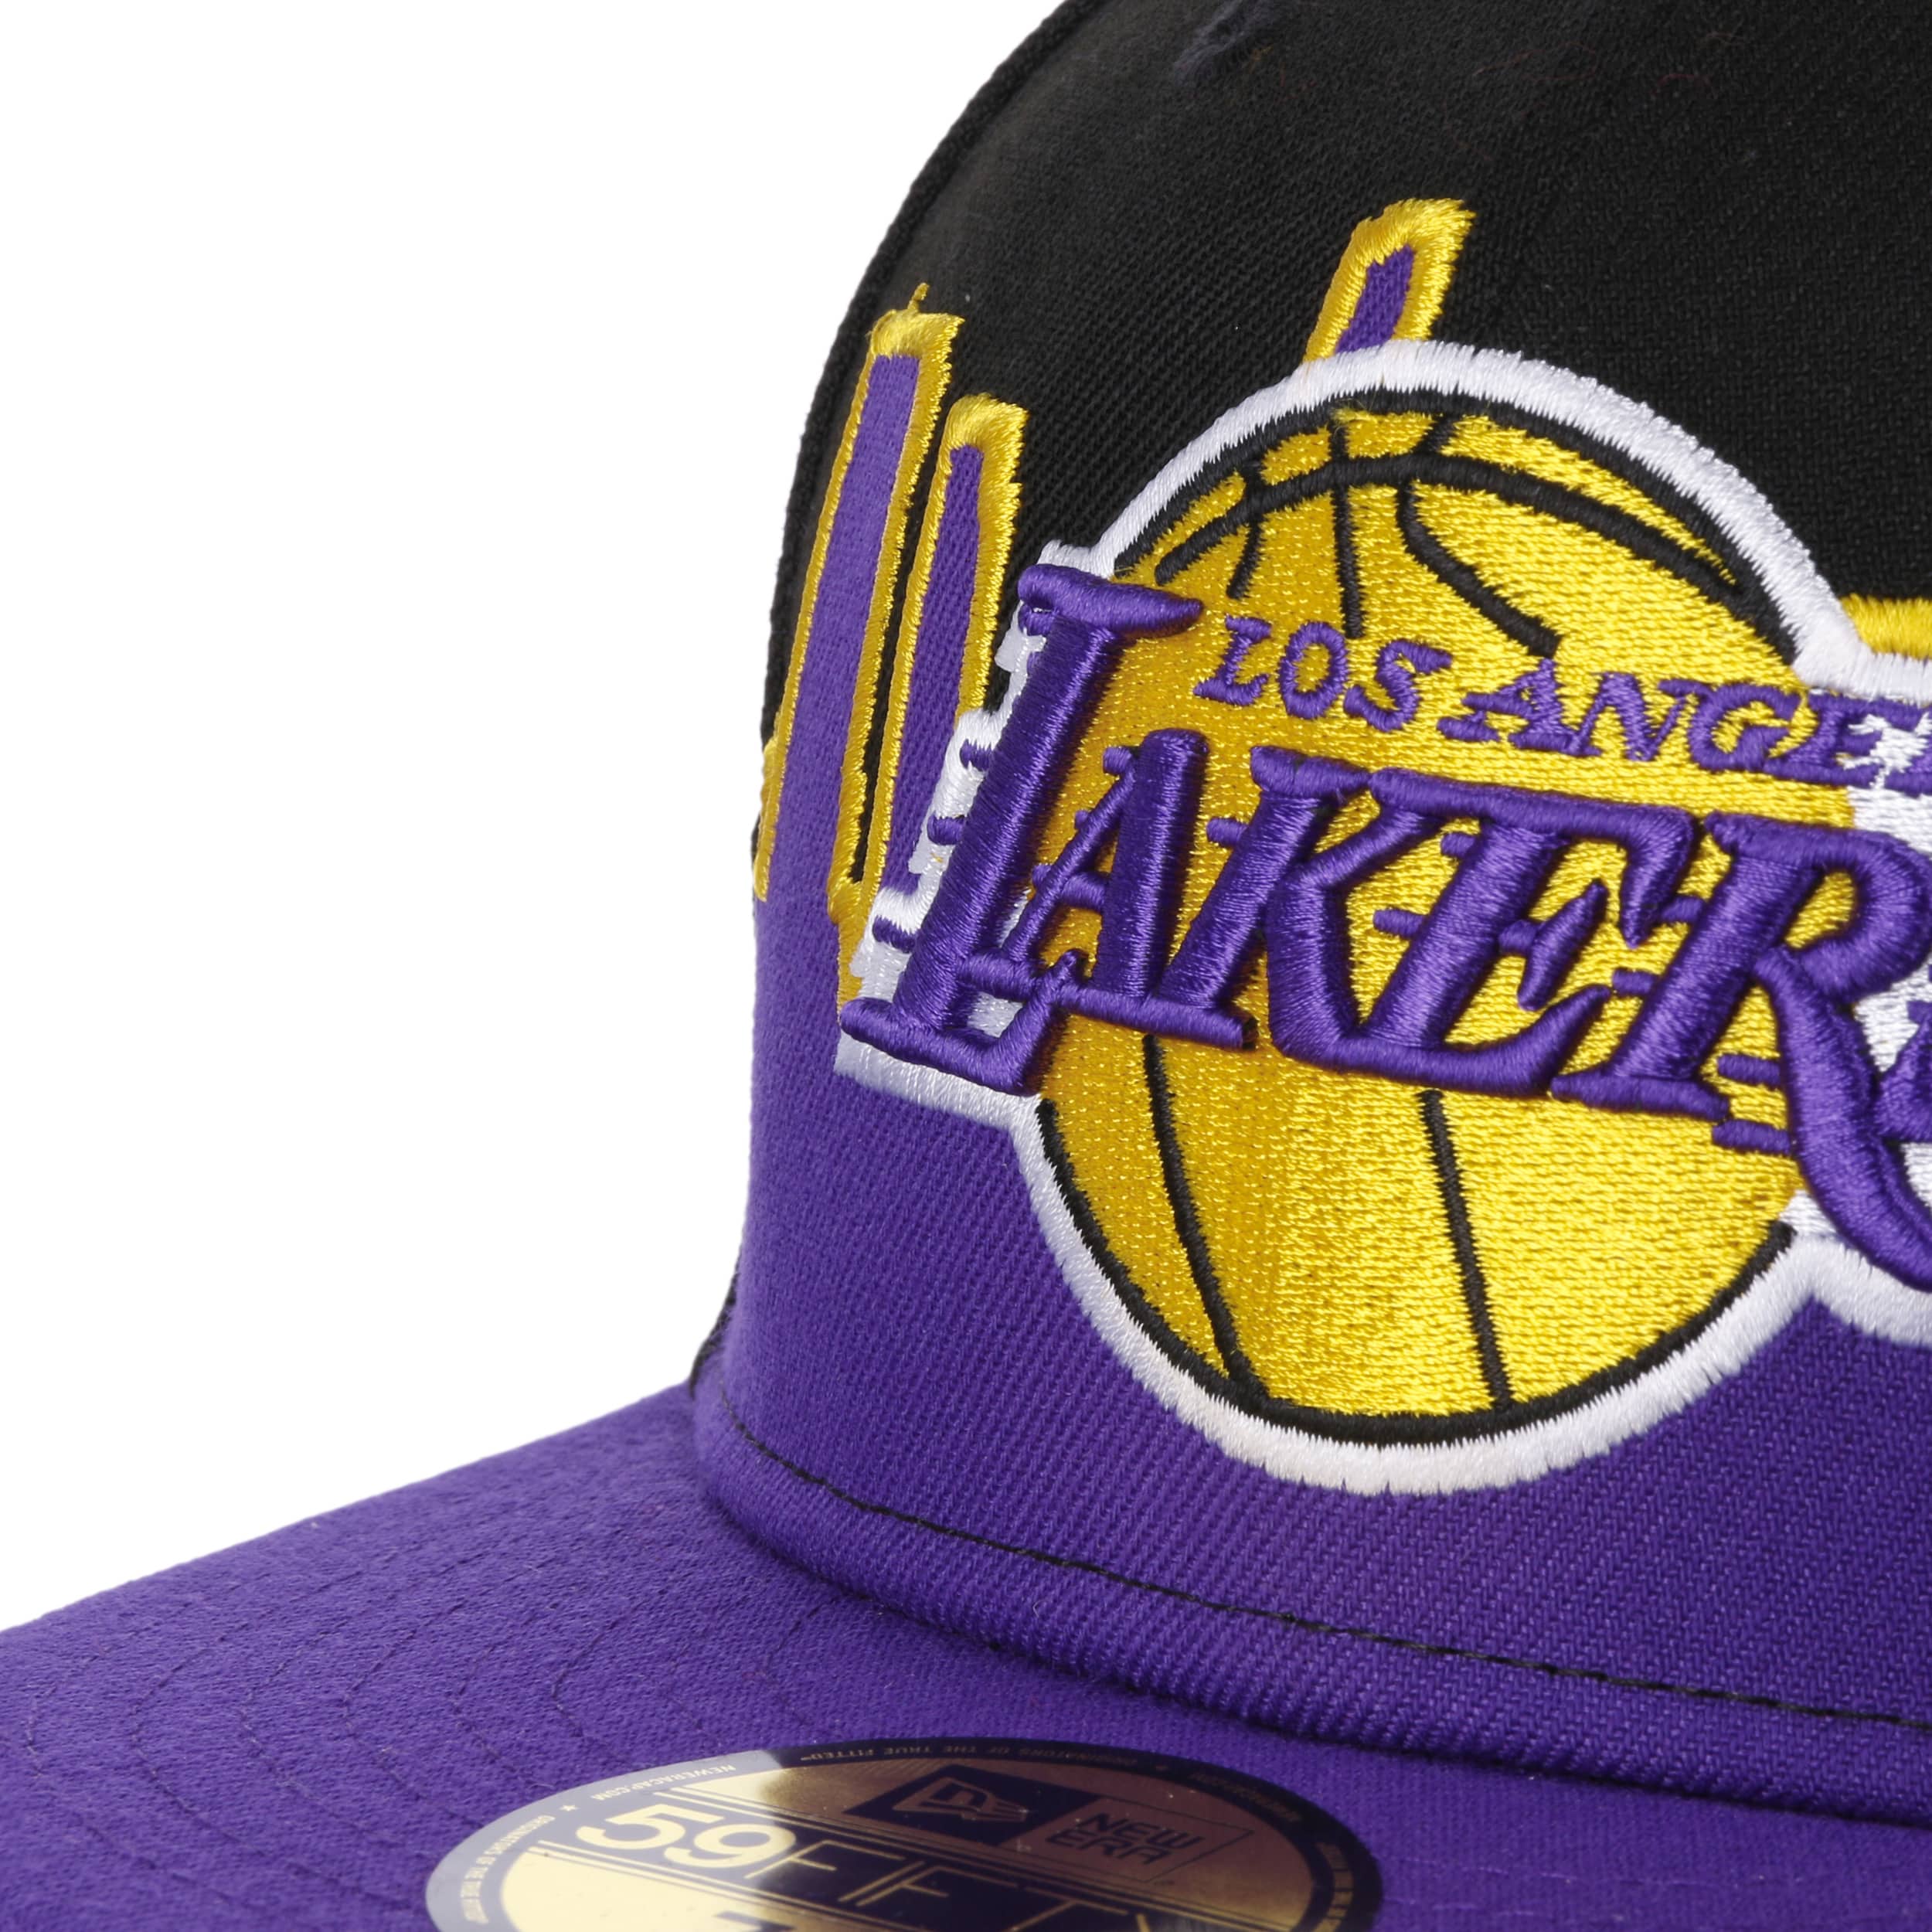 New Era Los Angeles Lakers Basic 59FIFTY Fitted Cap - Black